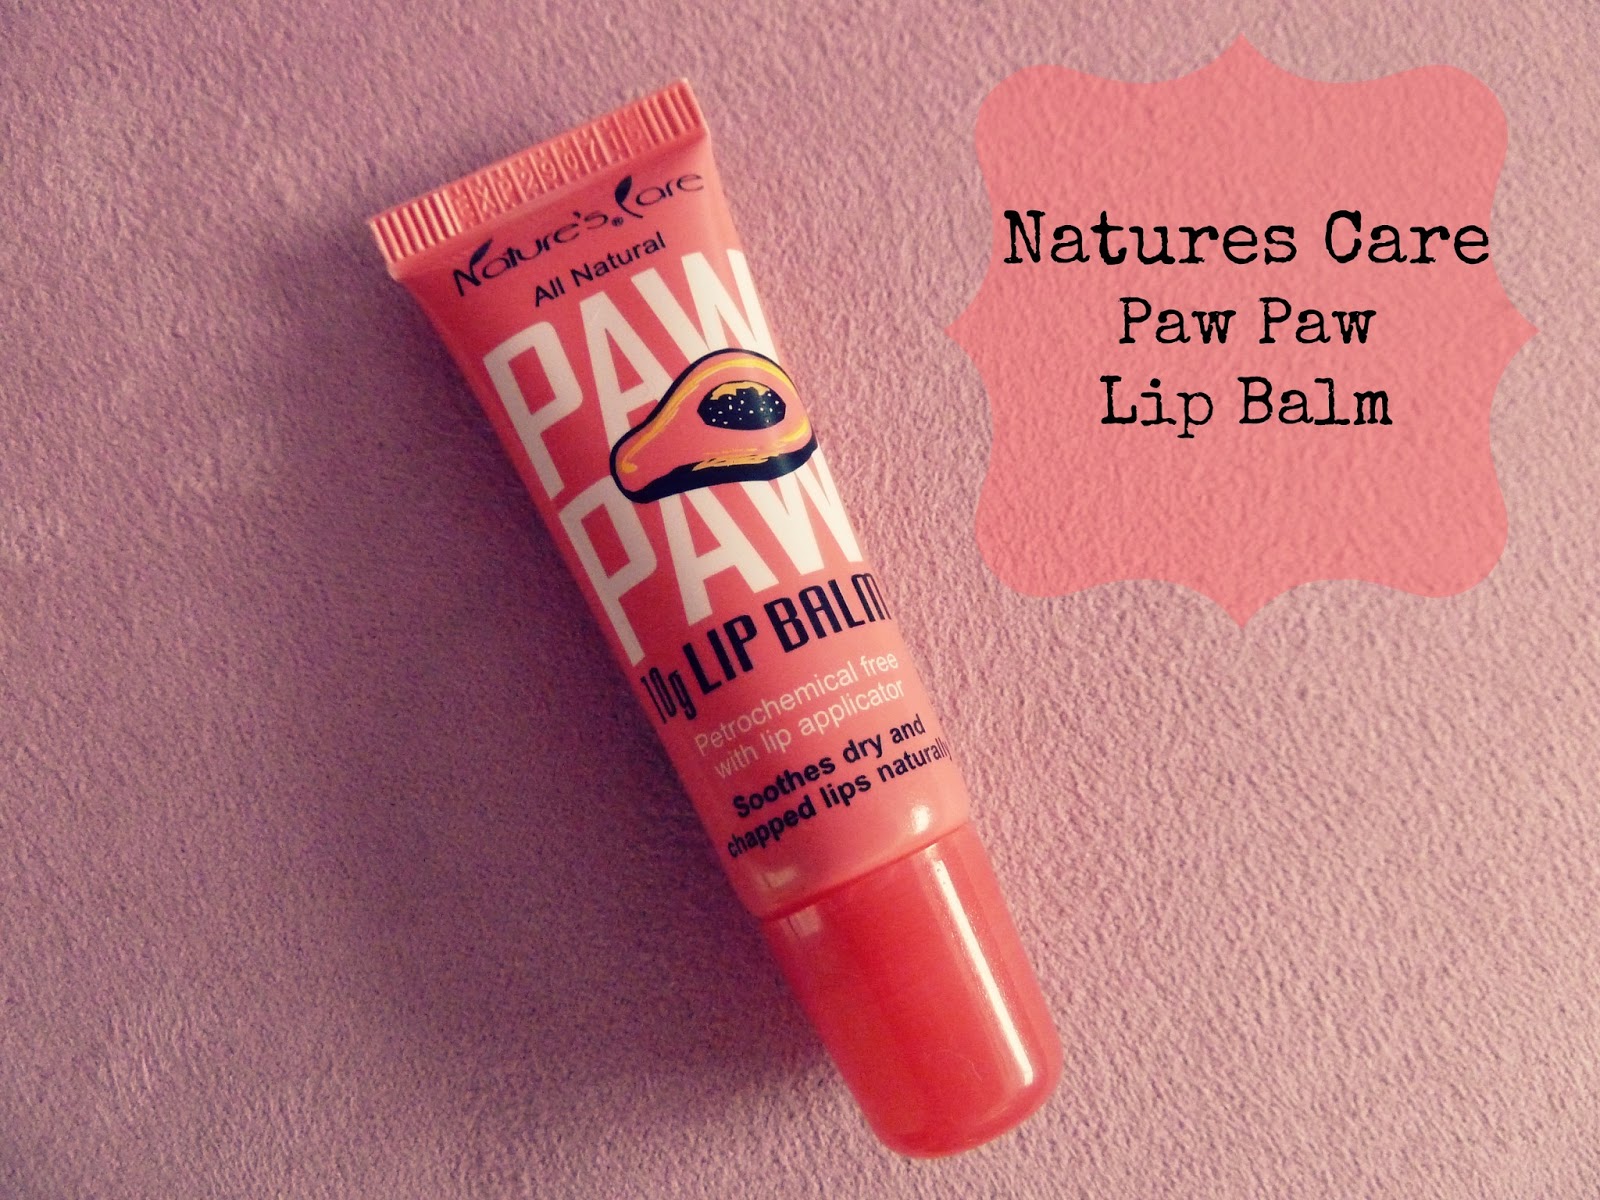 Australian Beauty Review Review of Nature's Care Paw Paw Lip Balm